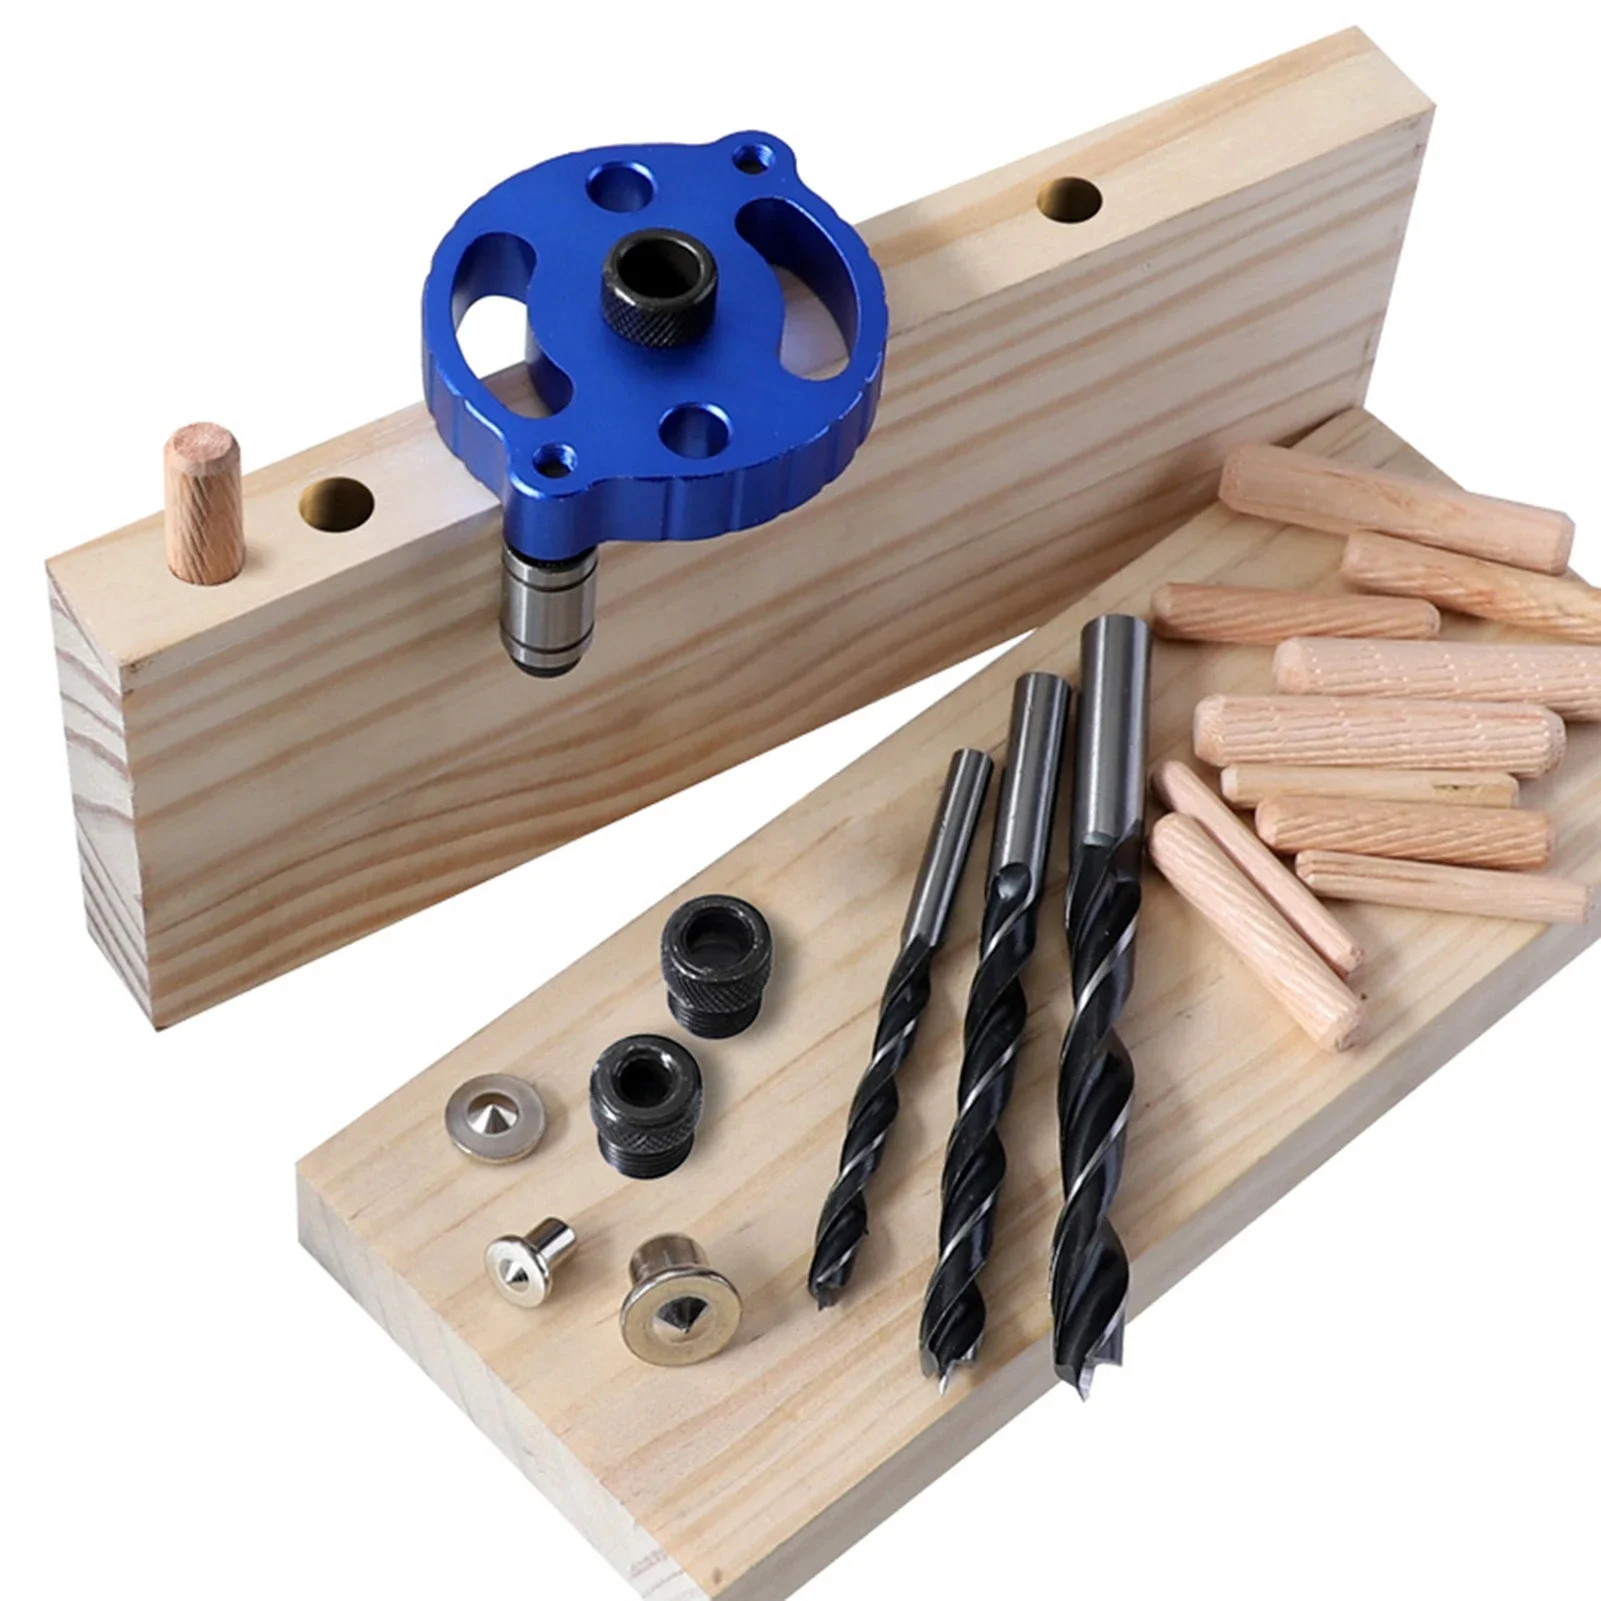 Drilling Hole Opener Woodworking Guide Device Tools for Precise and Practical Holes in Furniture Factories and Craft Sweet woodworking hole opener drill guide device precise practical tools drilling holes furniture factories and craft sweet